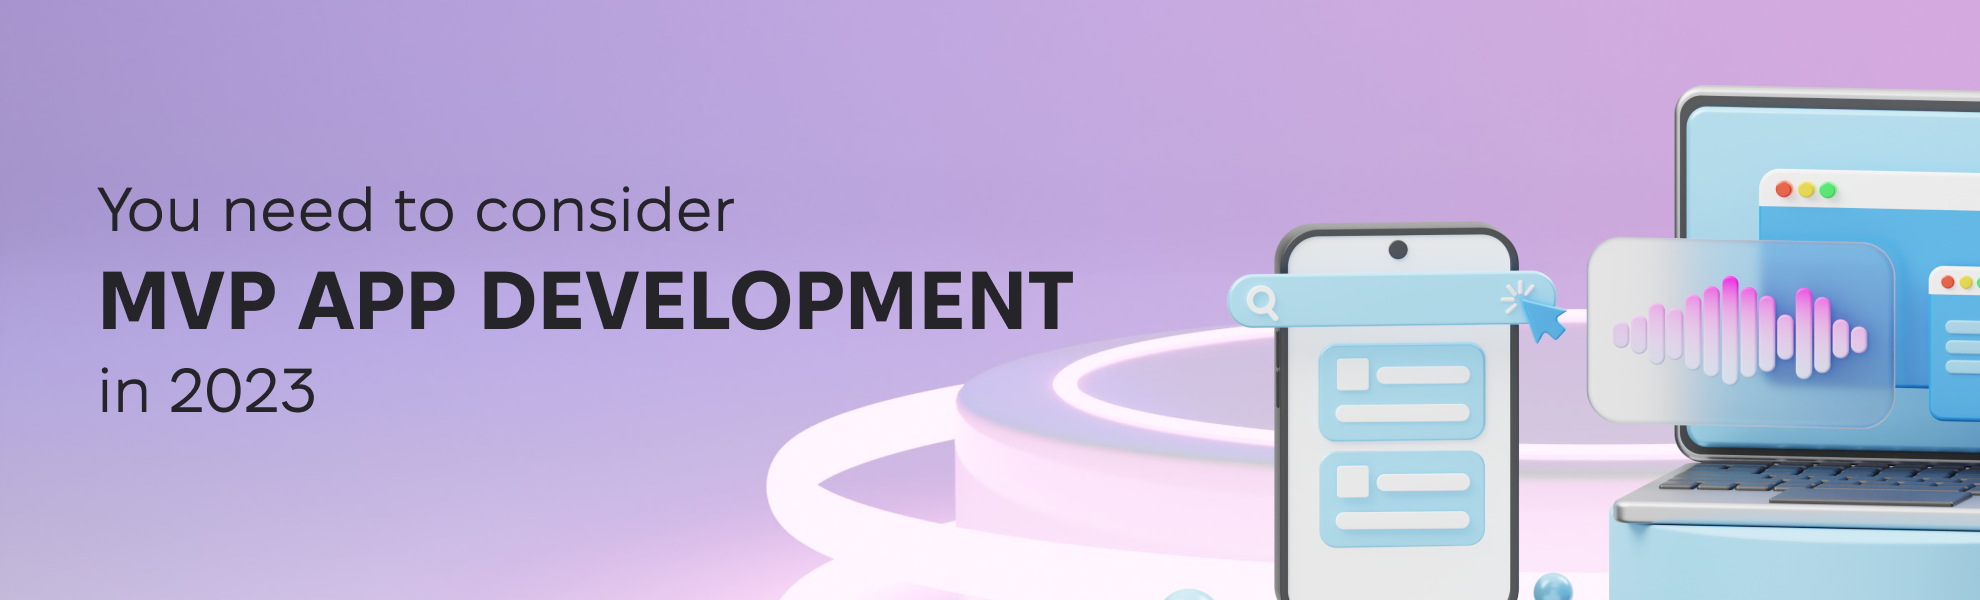 You Need To Consider MVP App Development in 2023! Here Is Why